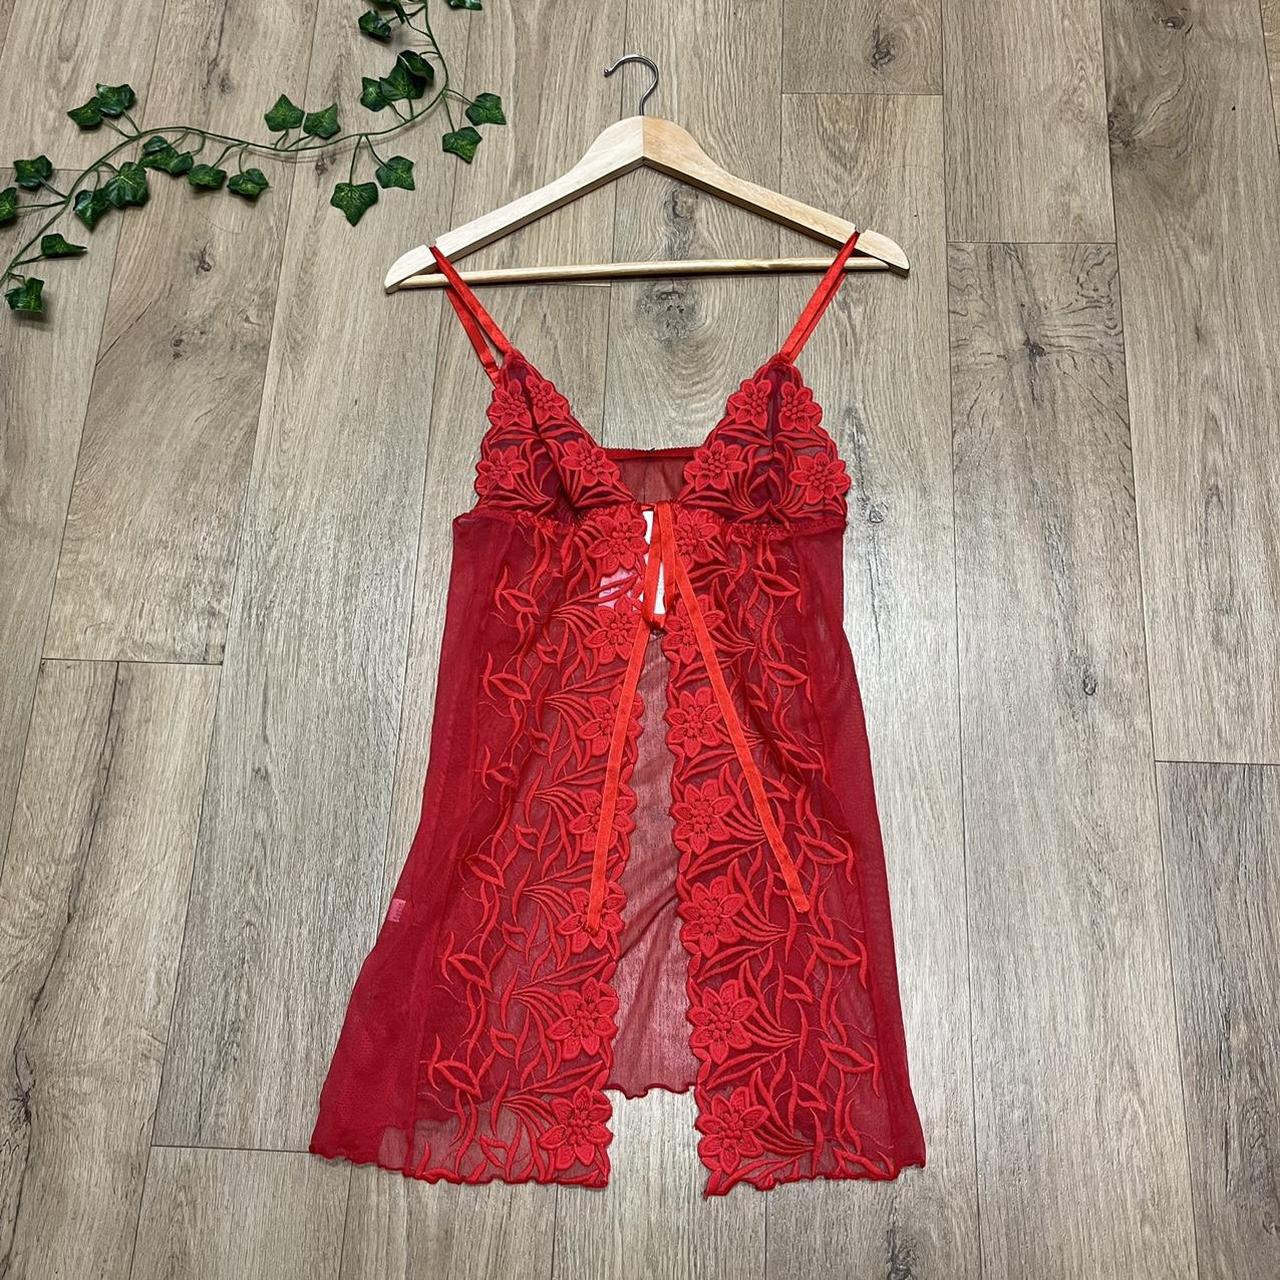 RED LACE BABY-DOLL / CHEMISE SIZE 8 Sheer red lace... - Depop